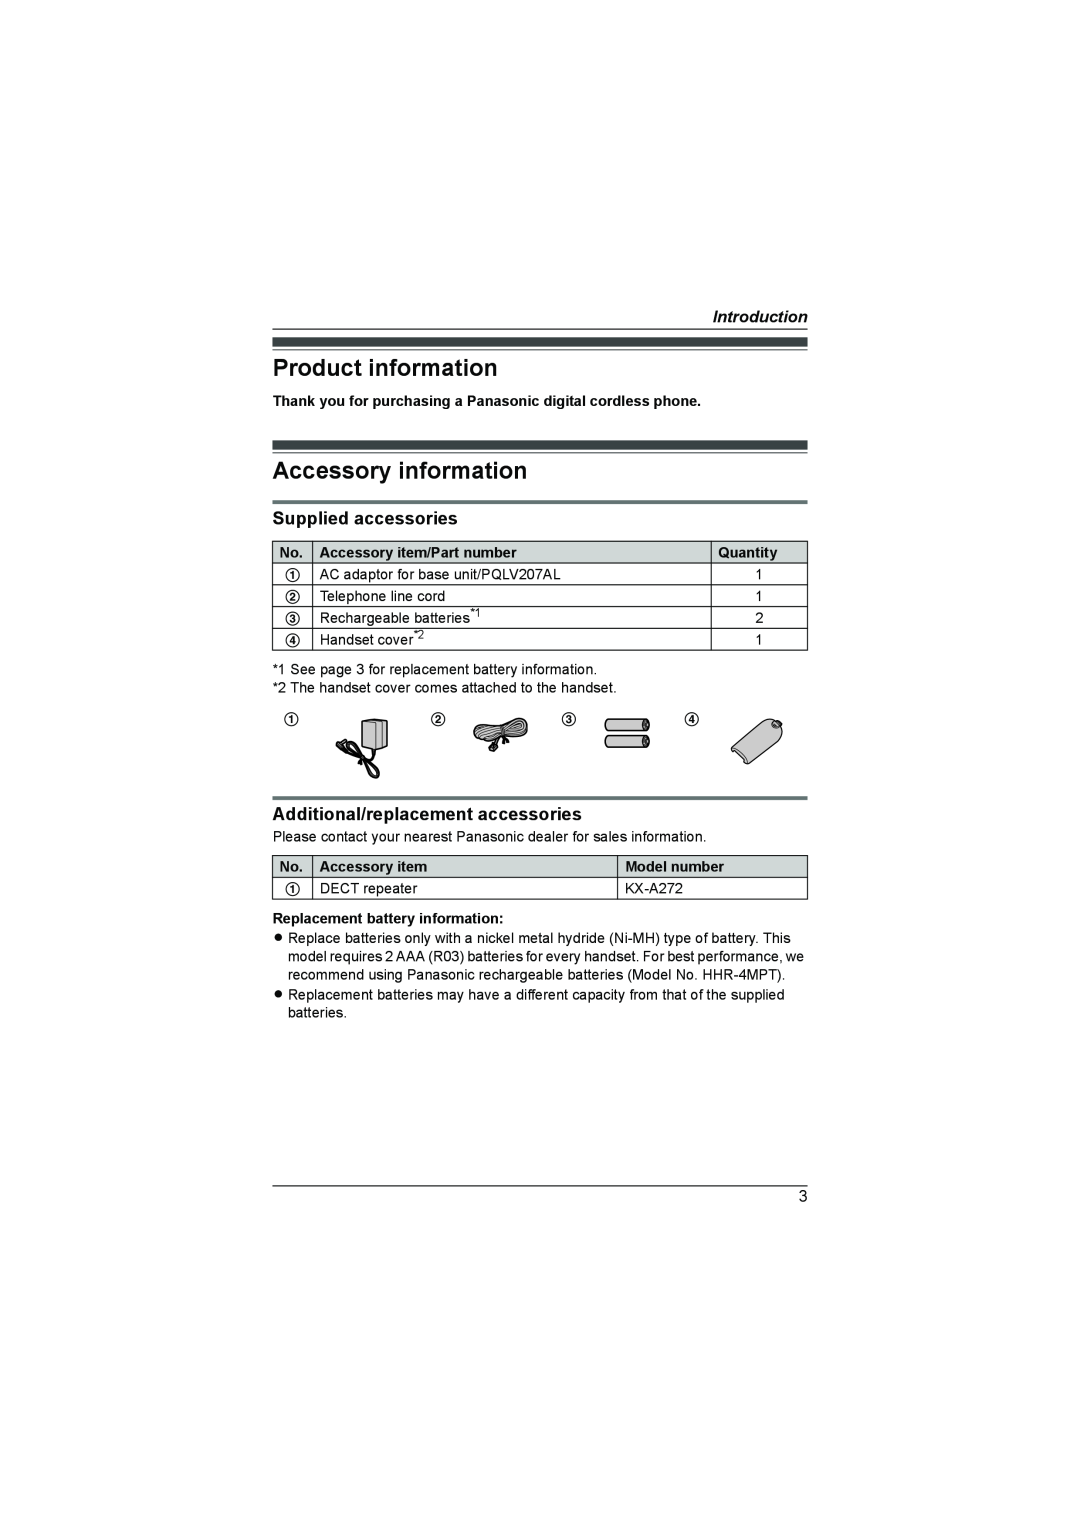 Panasonic KX-TG7341NZ Product information, Accessory information, Supplied accessories, Additional/replacement accessories 